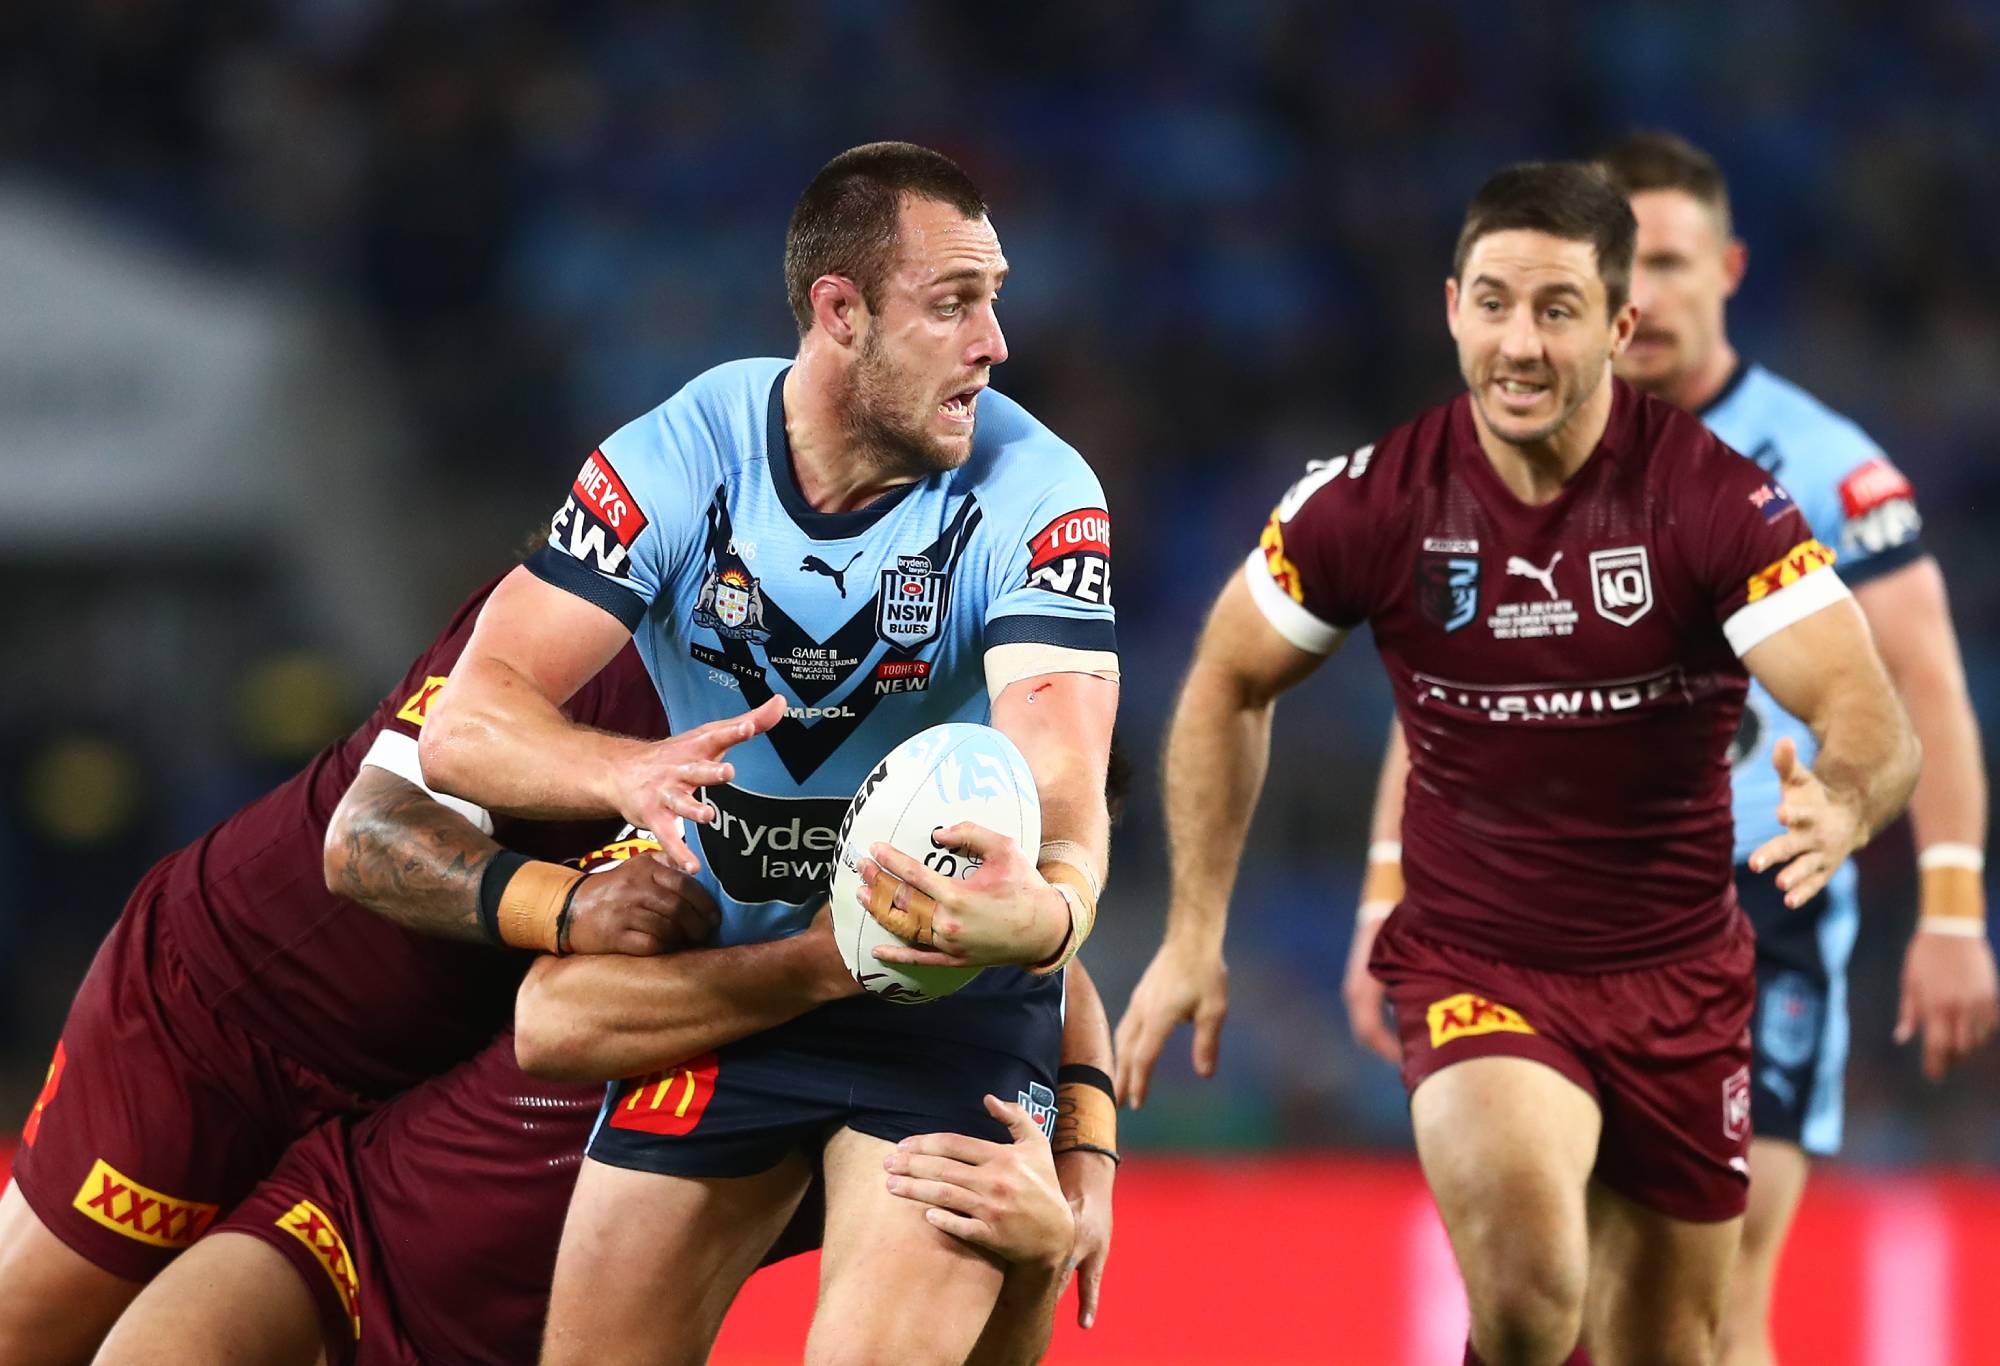 GOLD COAST, AUSTRALIA - JULY 14: Isaah Yeo of the Blues is tackled during game three of the 2021 State of Origin Series between the New South Wales Blues and the Queensland Maroons at Cbus Super Stadium on July 14, 2021 in Gold Coast, Australia. (Photo by Chris Hyde/Getty Images)